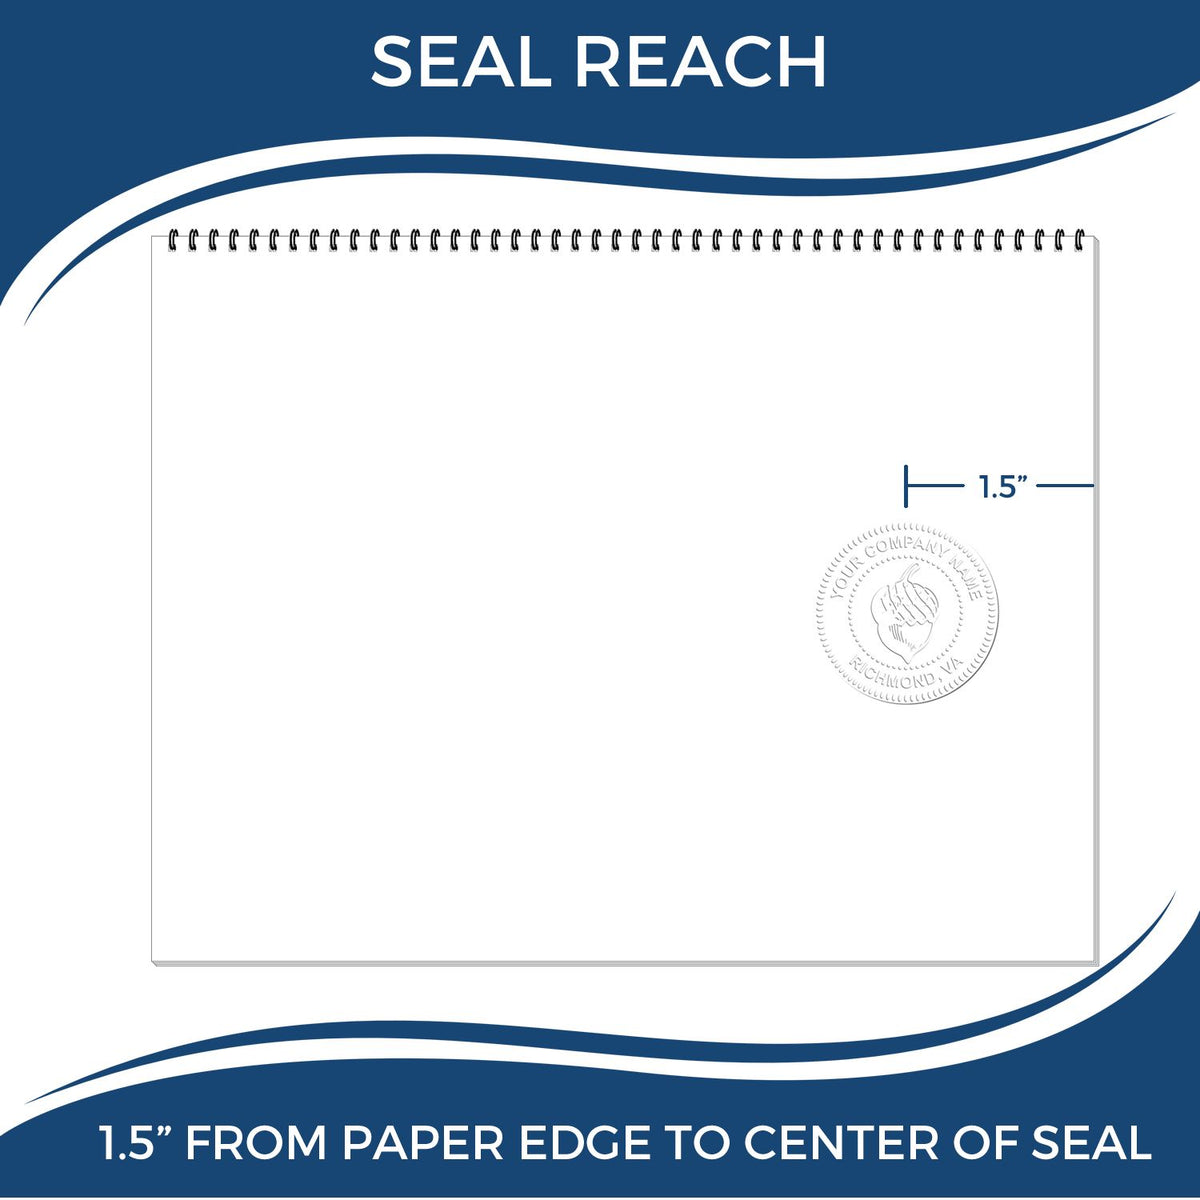 An infographic showing the seal reach which is represented by a ruler and a miniature seal image of the Soft Vermont Professional Geologist Seal